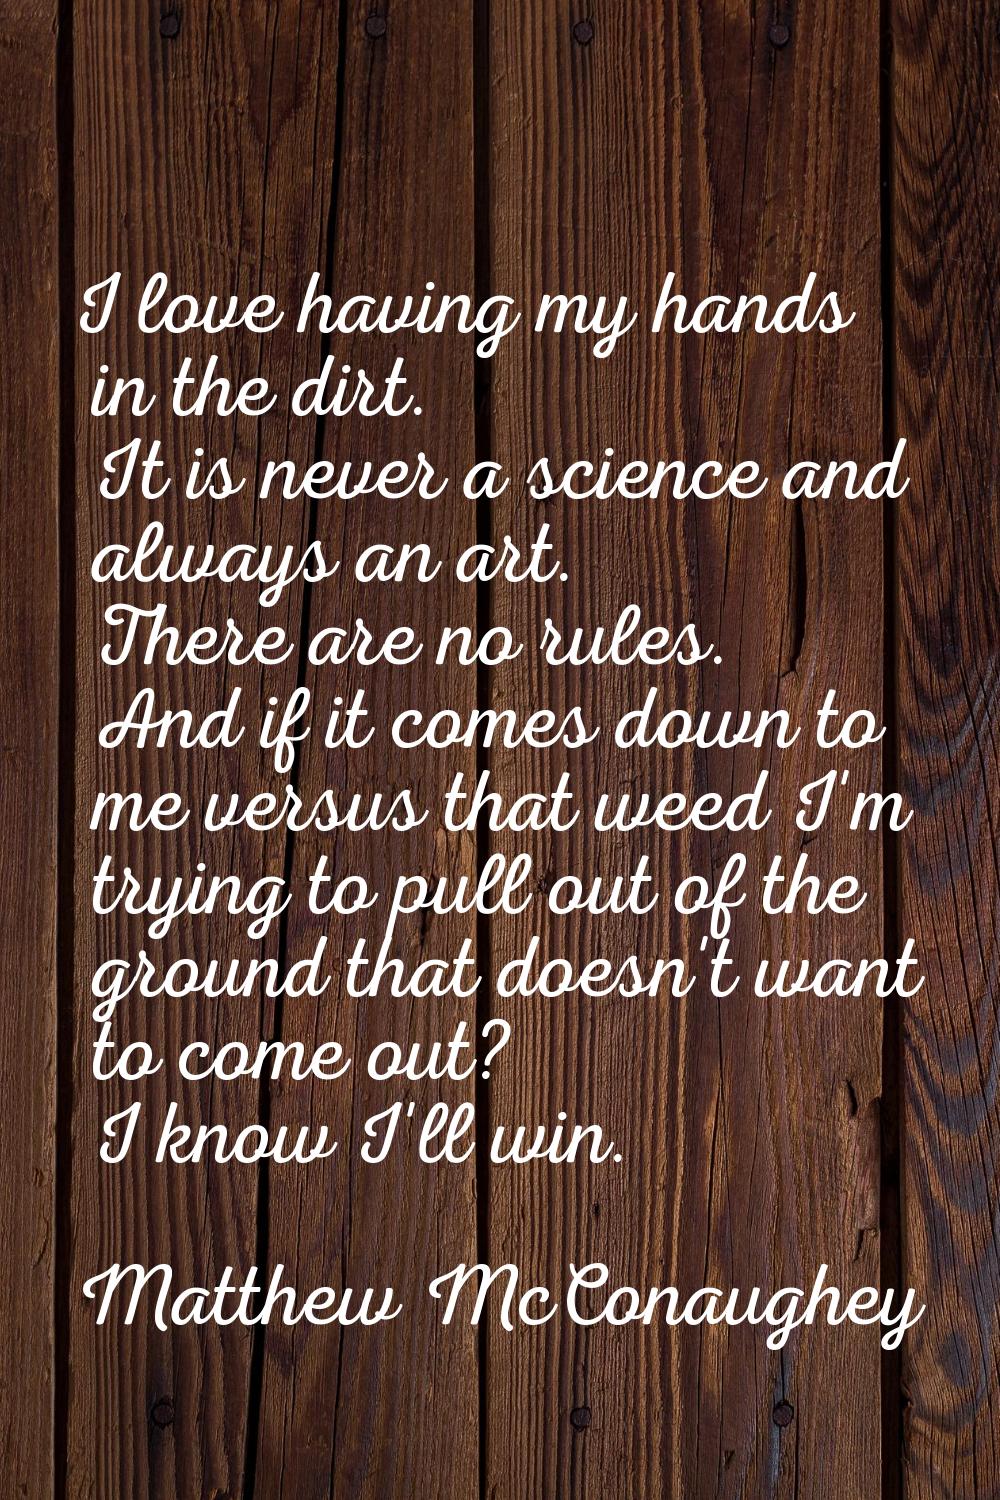 I love having my hands in the dirt. It is never a science and always an art. There are no rules. An